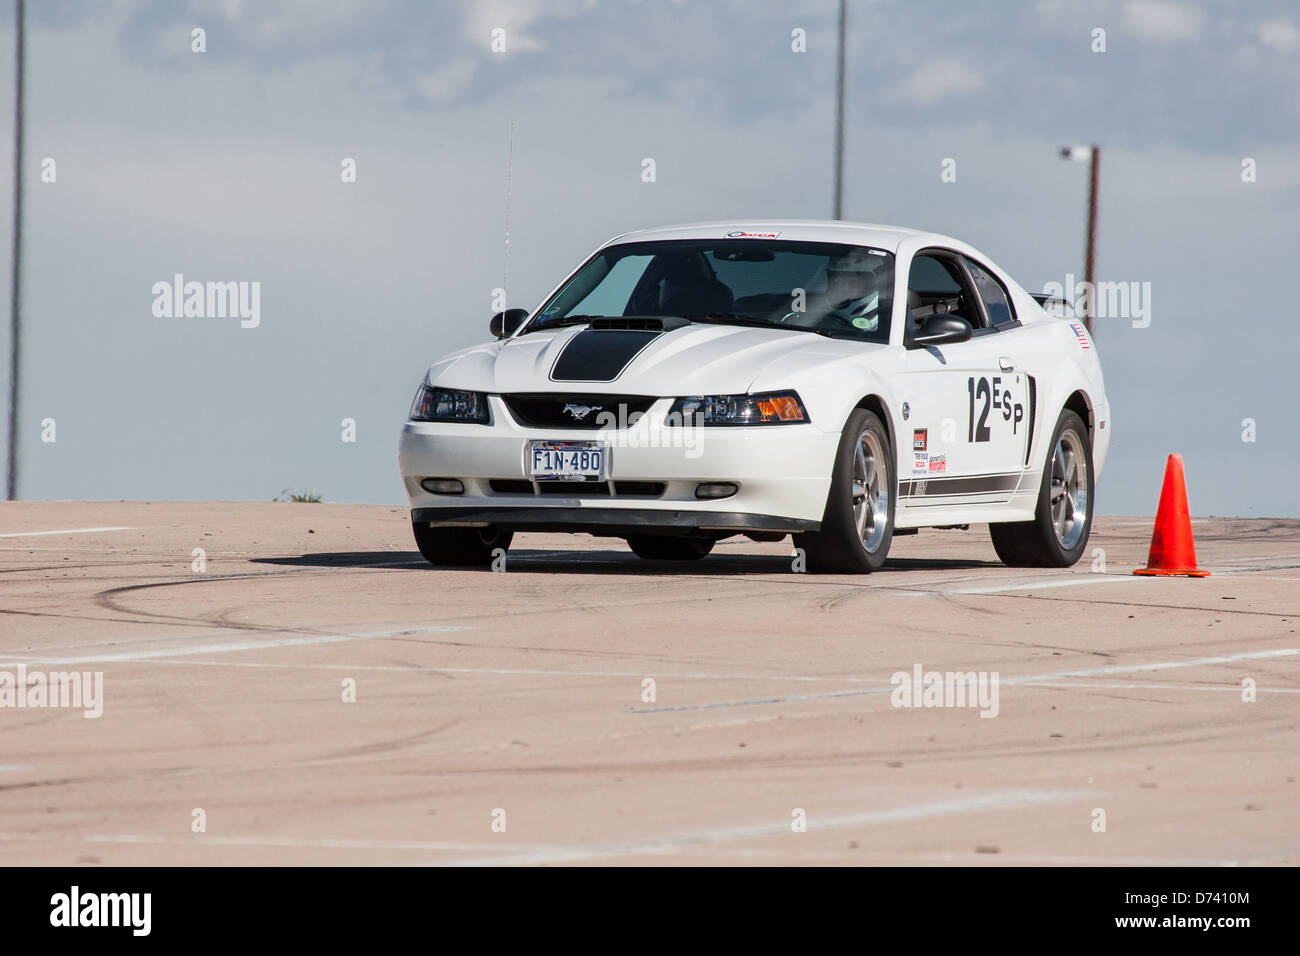 2004 White Ford Mach 1 Mustang in an autocross race at a regional Sports Car Club of America (SCCA) event Stock Photo